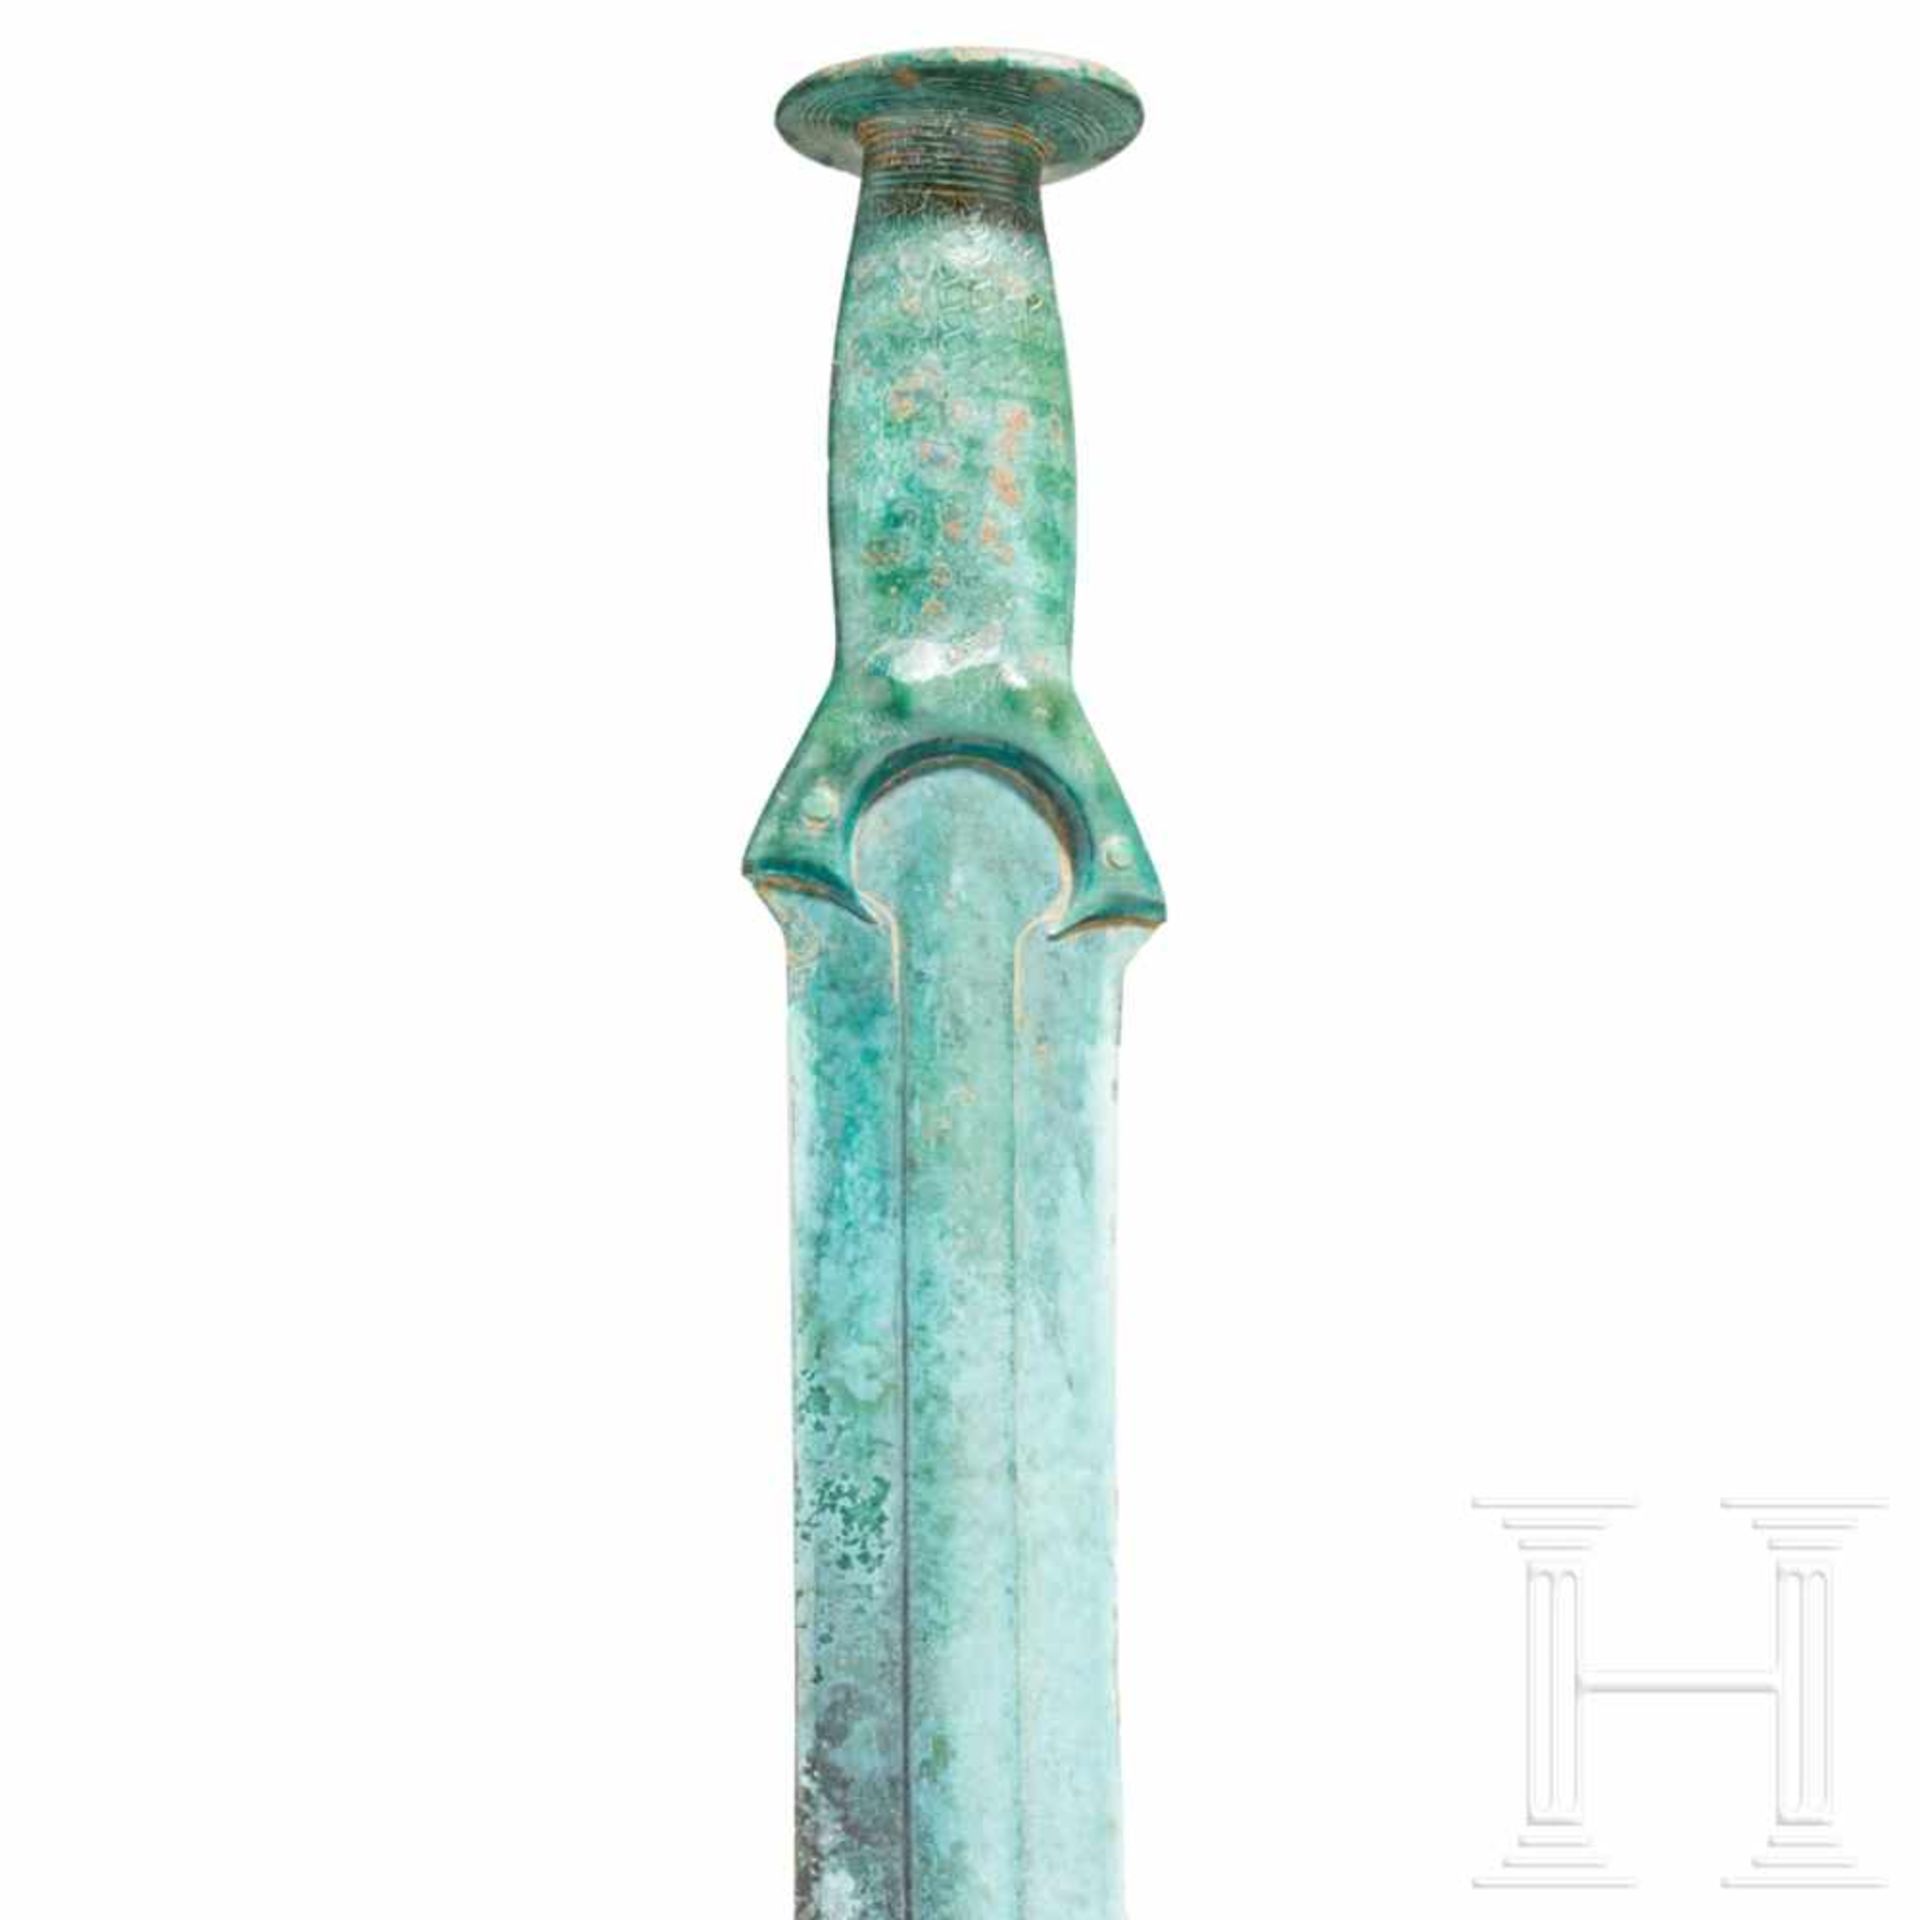 A German bronze sword of the Riegsee type, 1300 – 1200 B.C.A beautifully preserved bronze sword with - Bild 4 aus 8